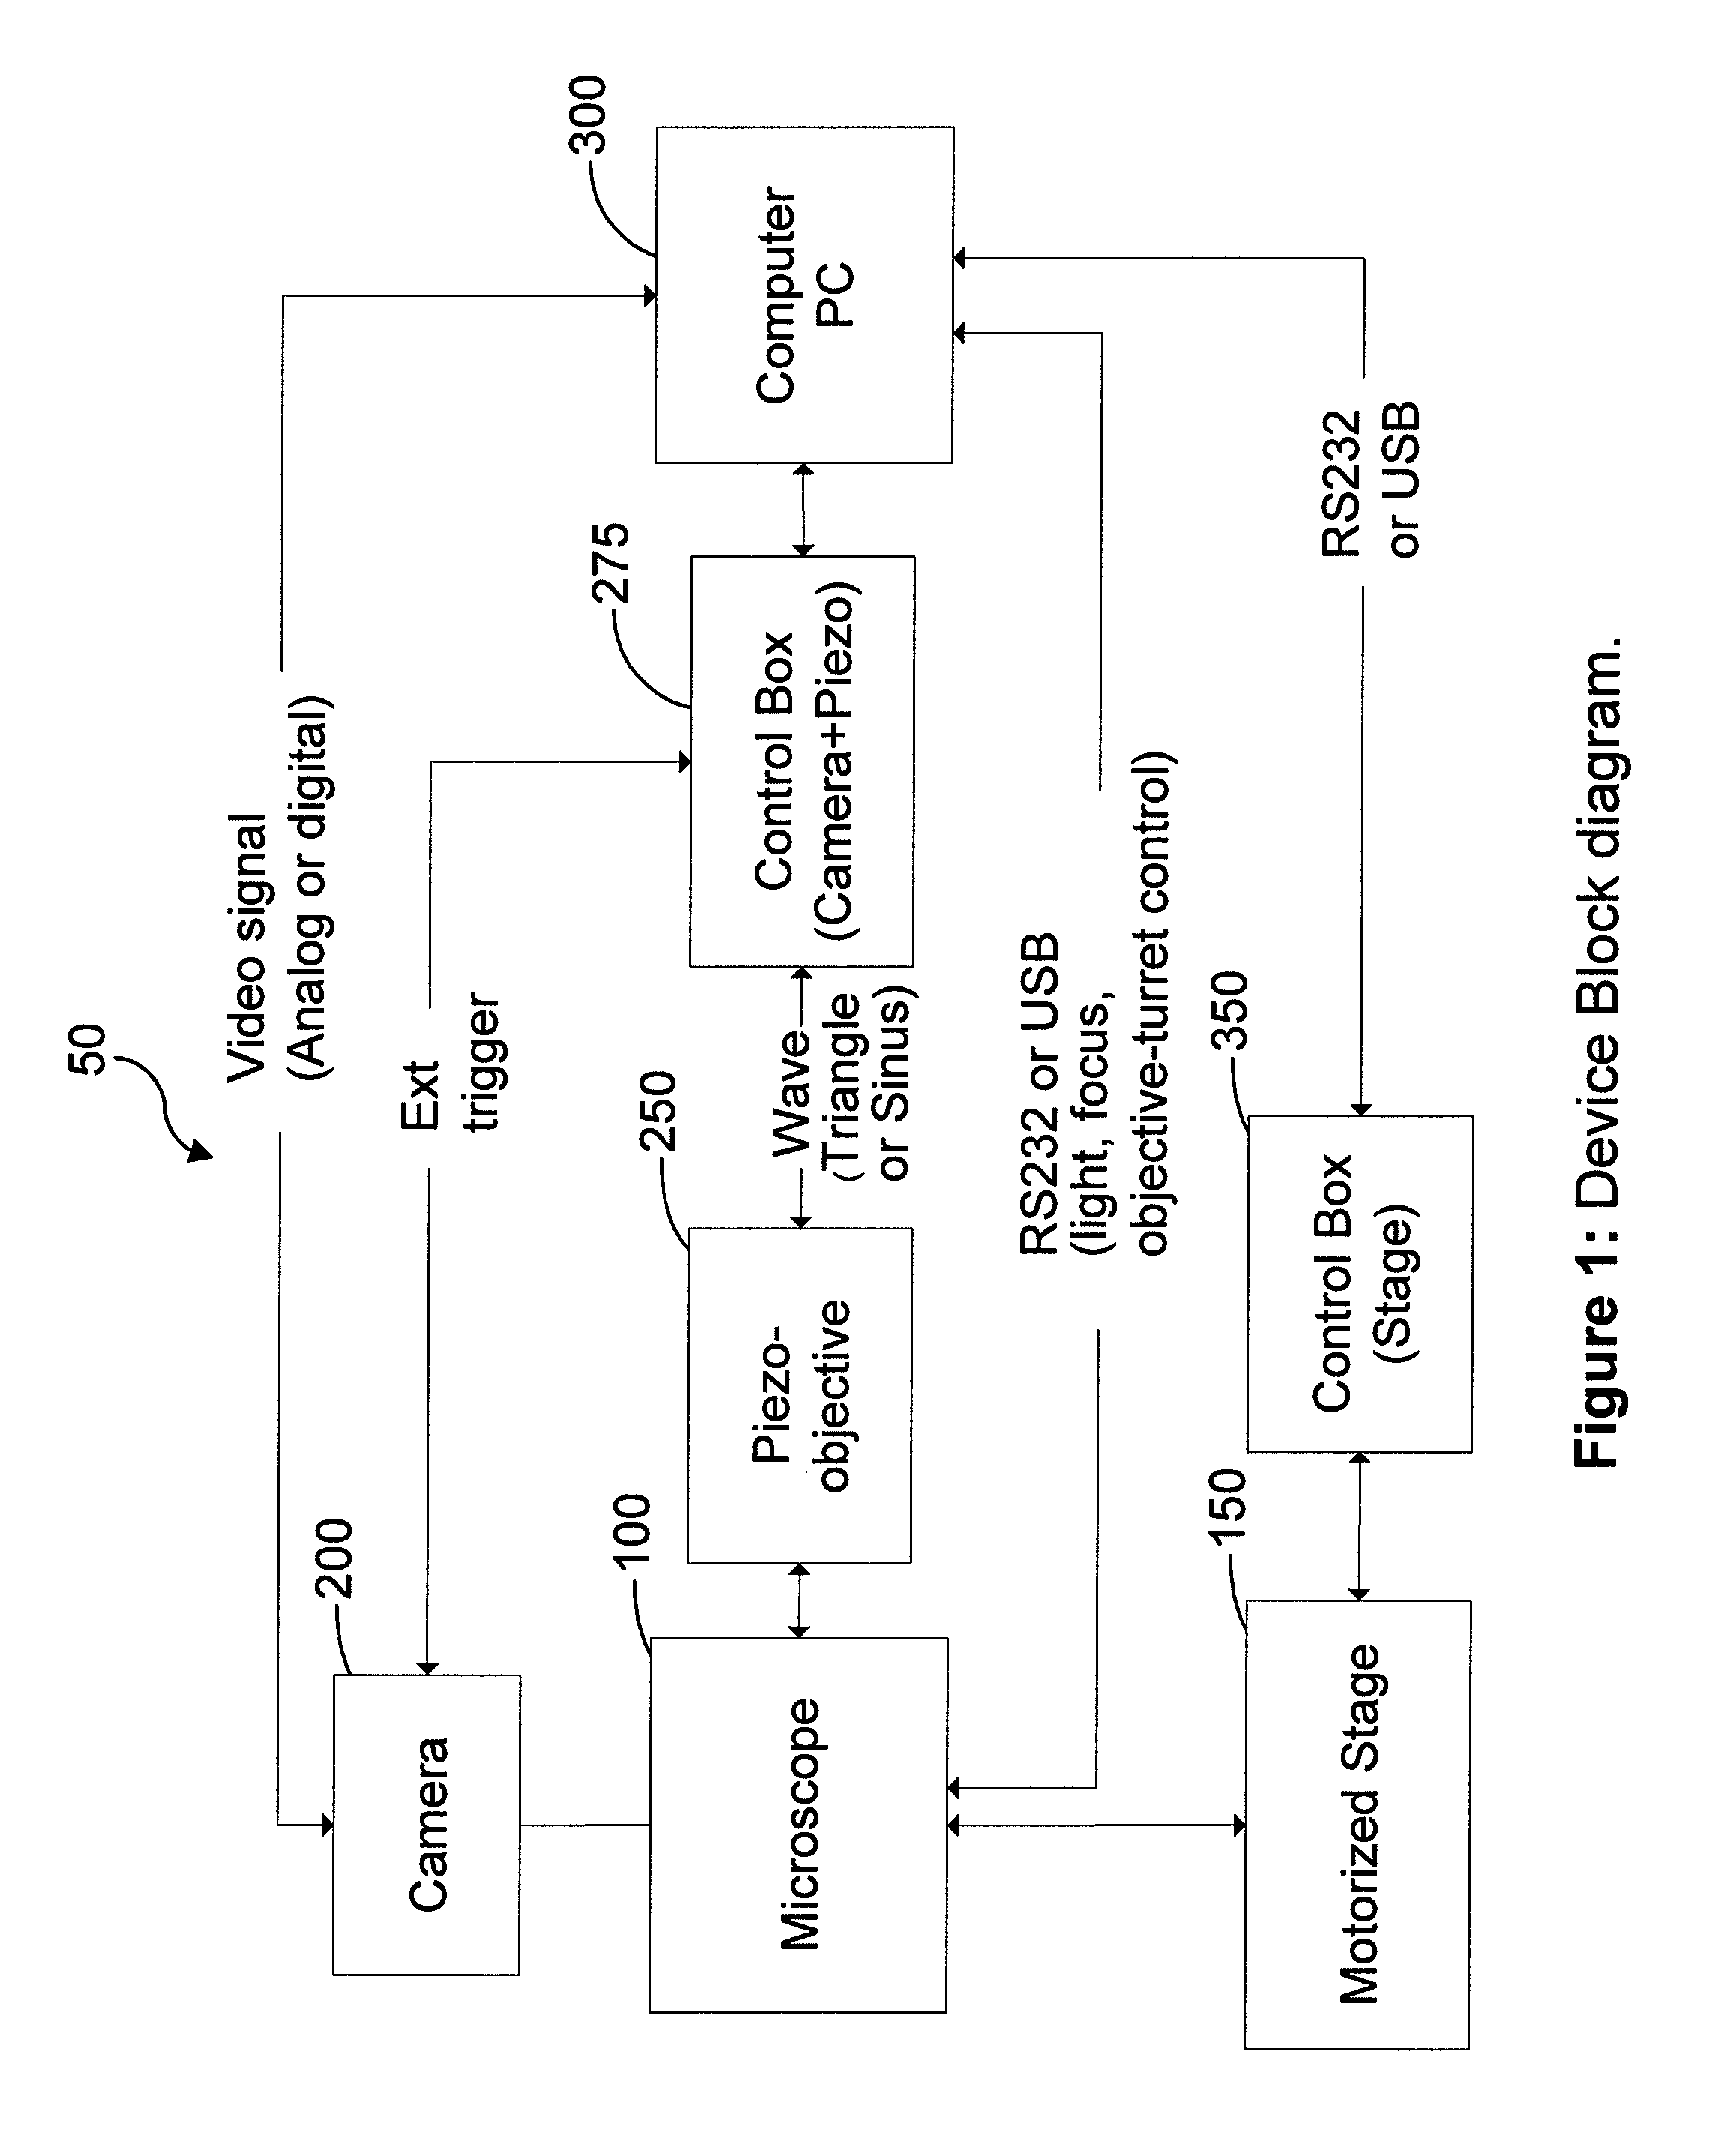 Apparatus and method for rapid microscopic image focusing having a movable objective